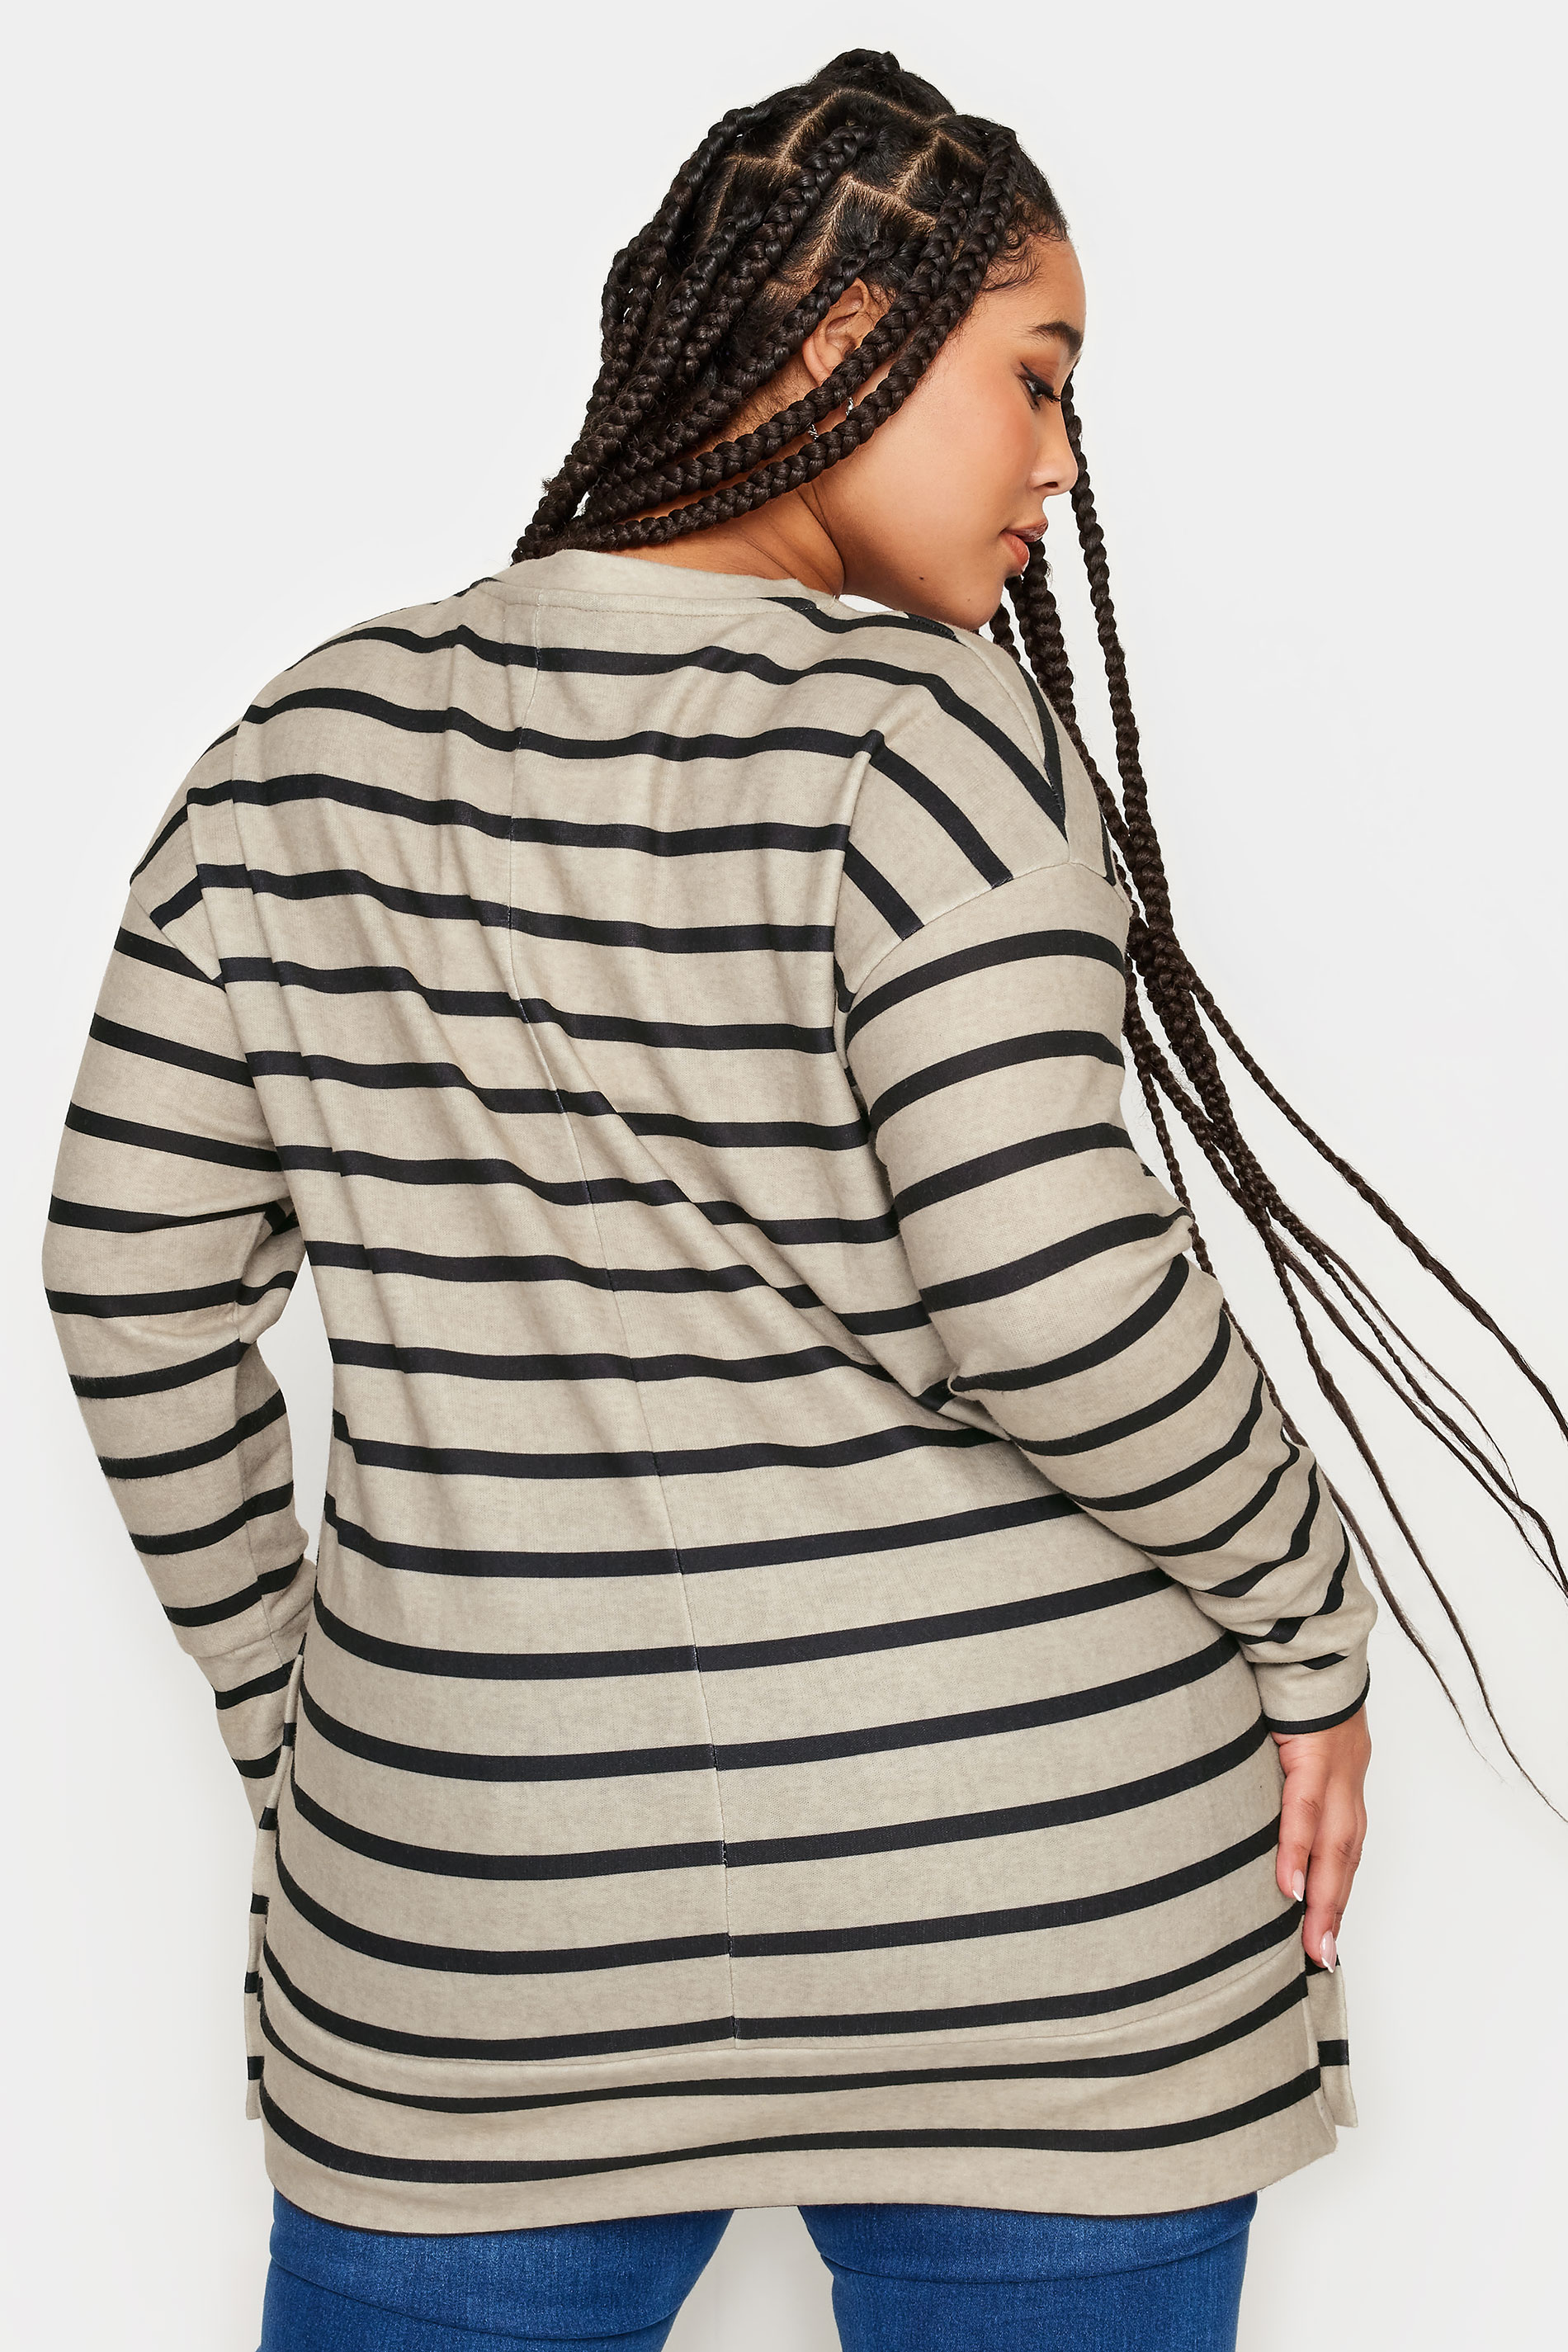 YOURS Plus Size Beige Brown Striped Side Popper Top | Yours Clothing 3